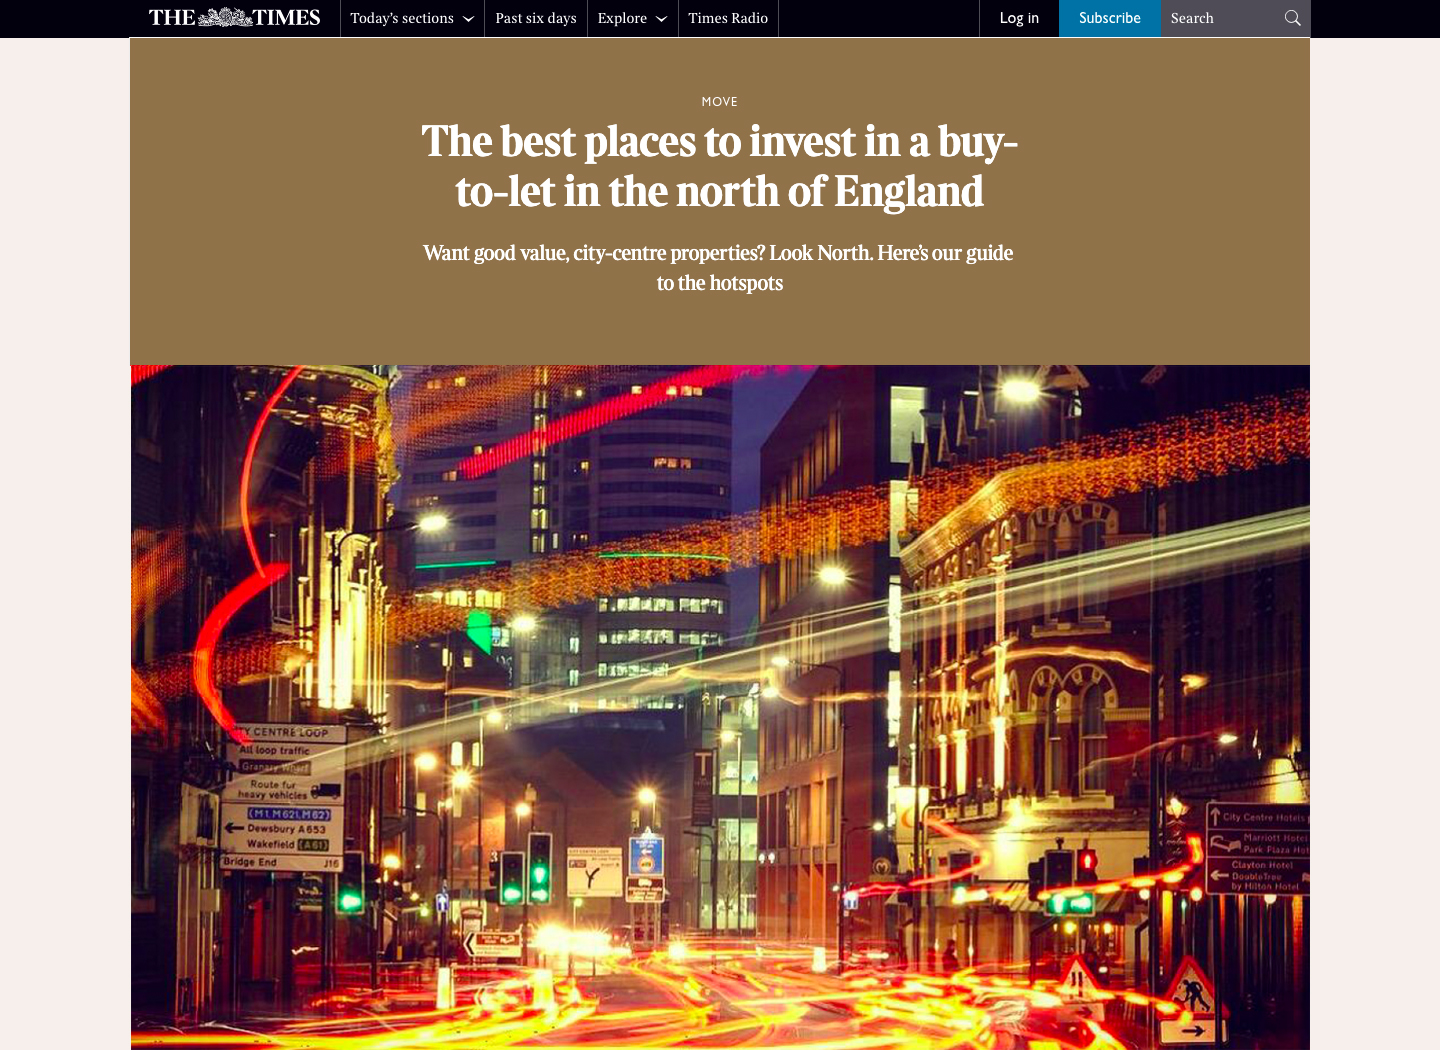 The best places to invest in a buy-to-let in the north of England